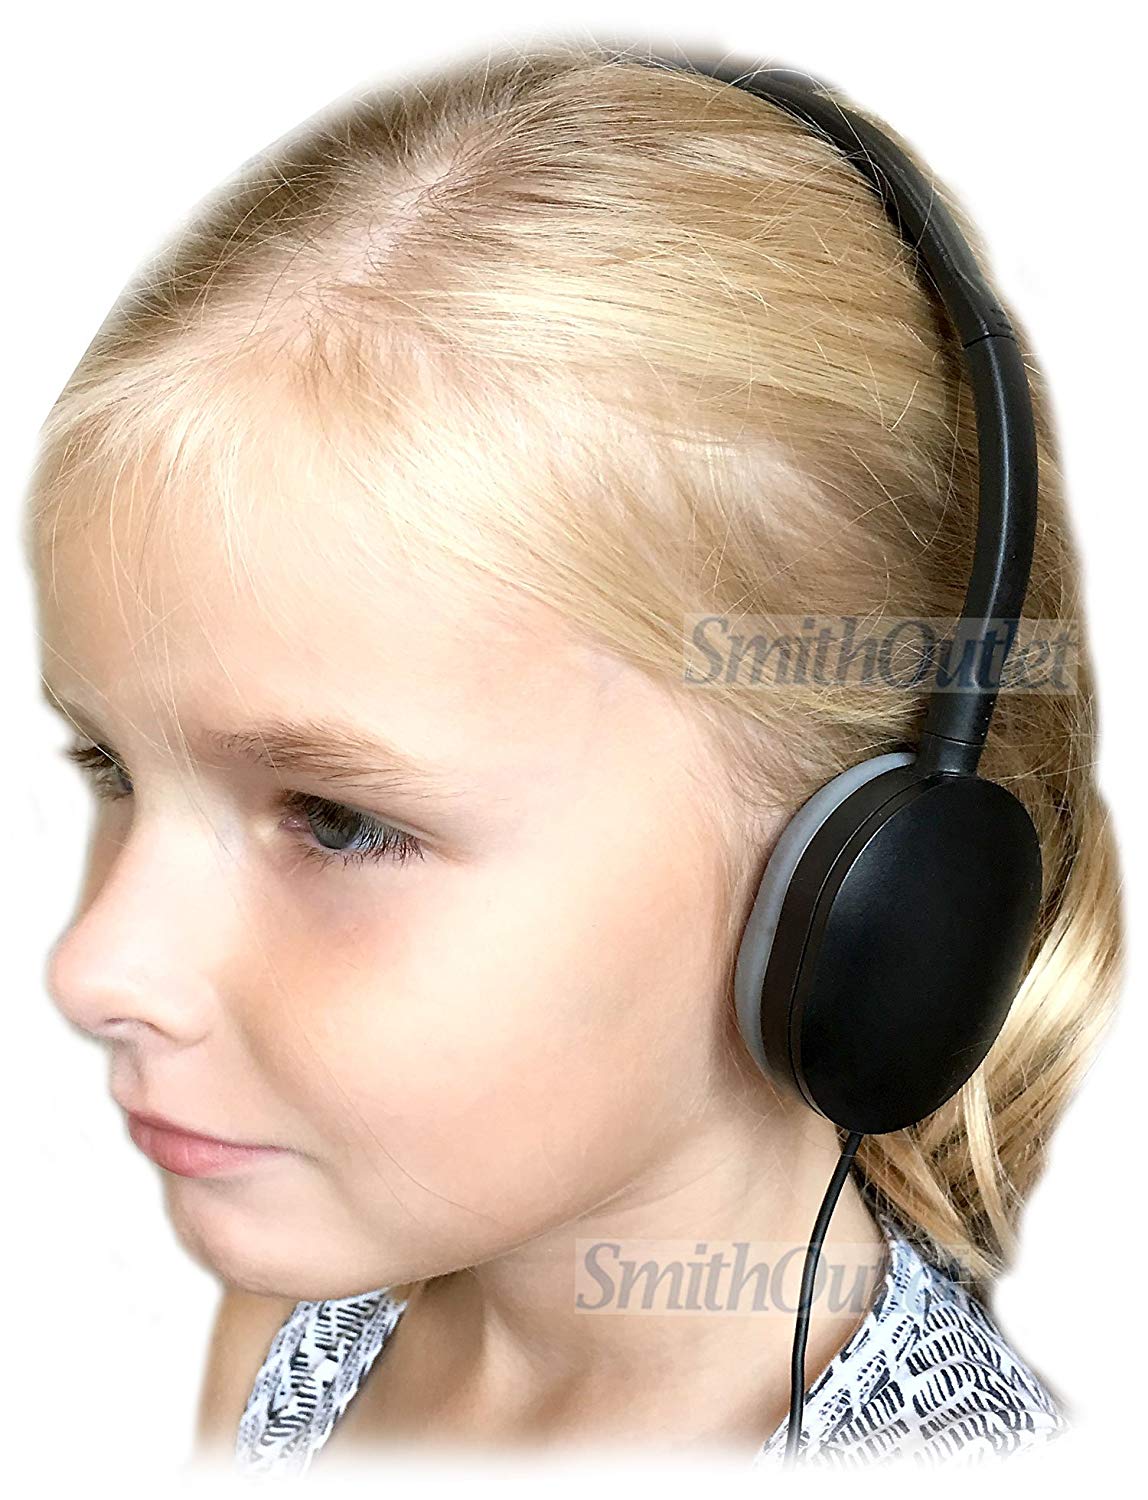 Flexibility of SmithOutlet Headphone Rubber Earpads for Various Head Sizes